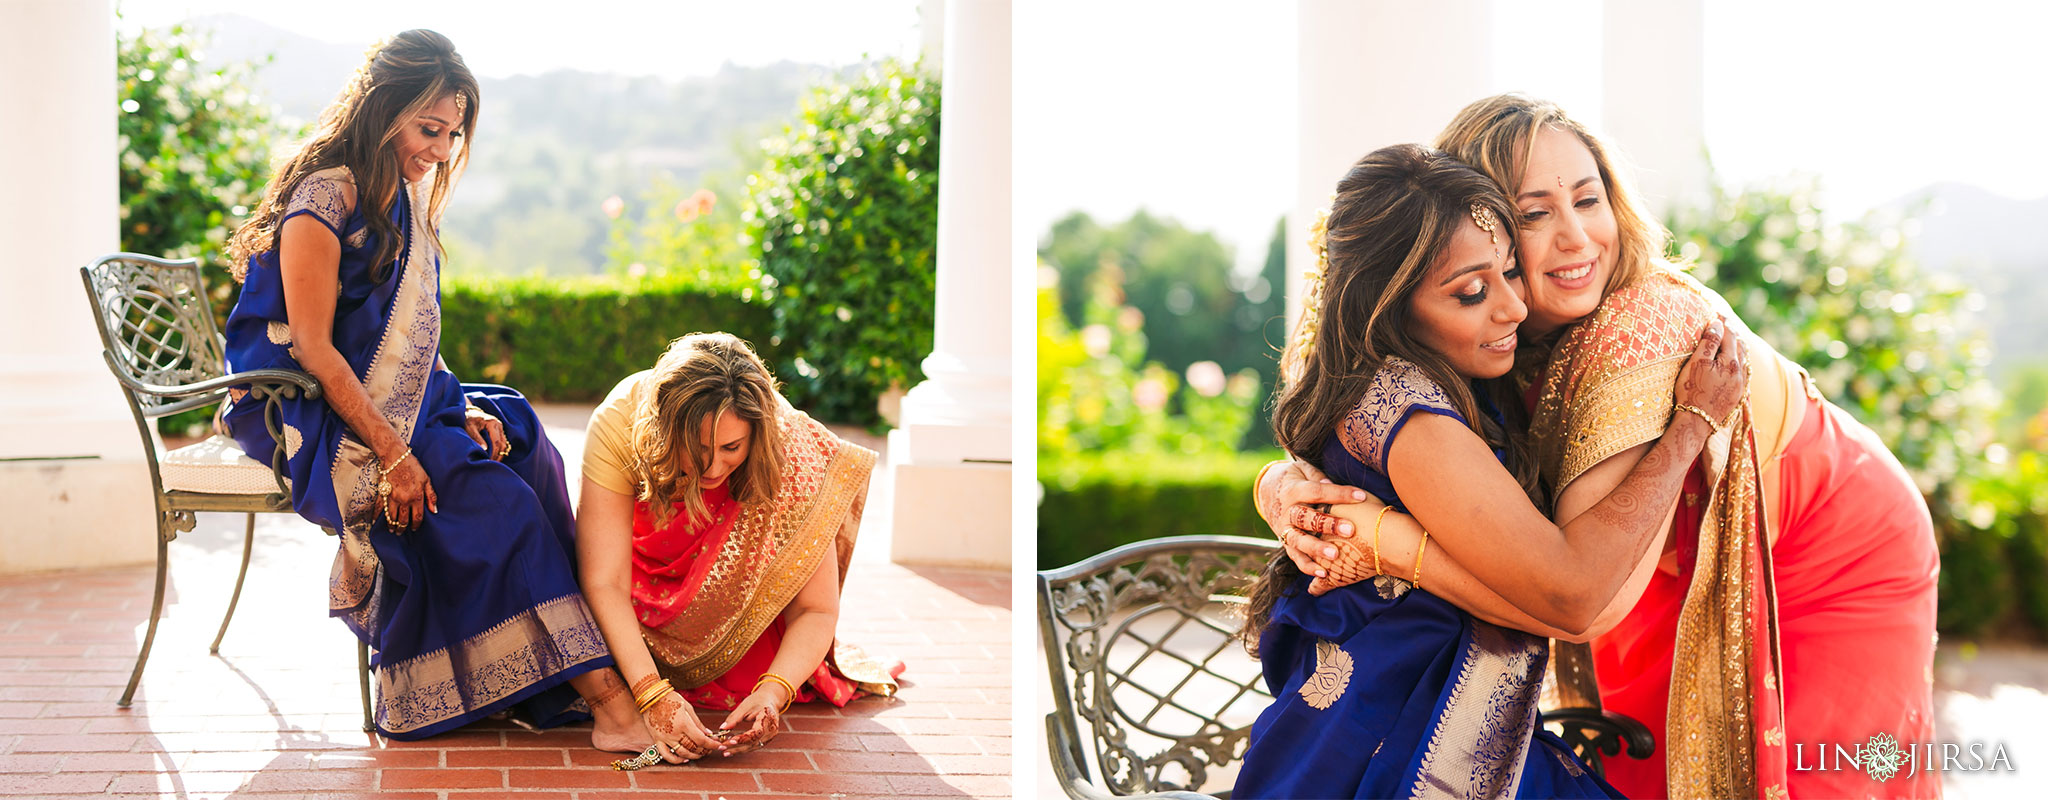 002 sherwood country club indian wedding photography